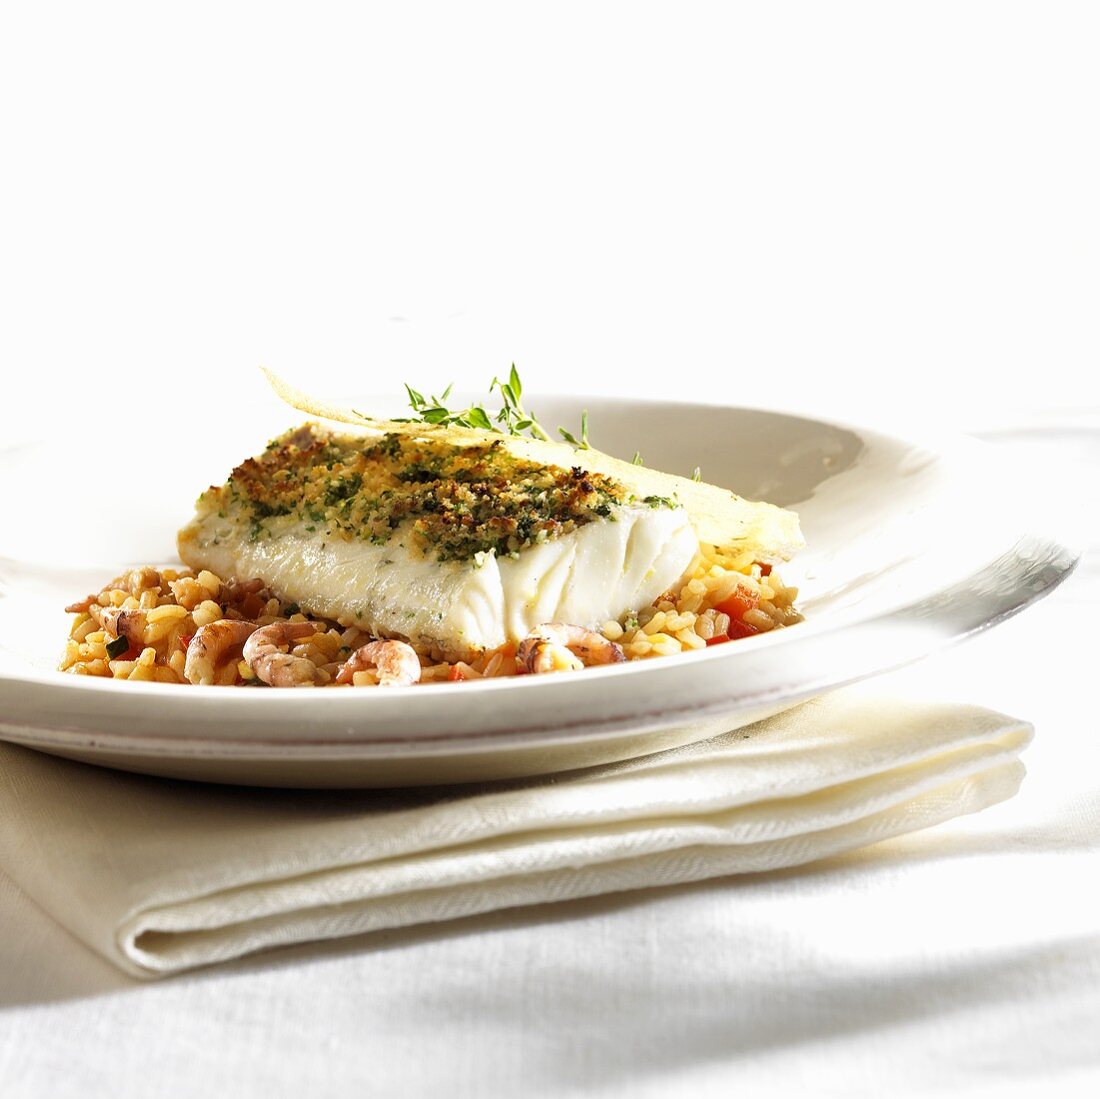 Cod with herb crust on tomato risotto